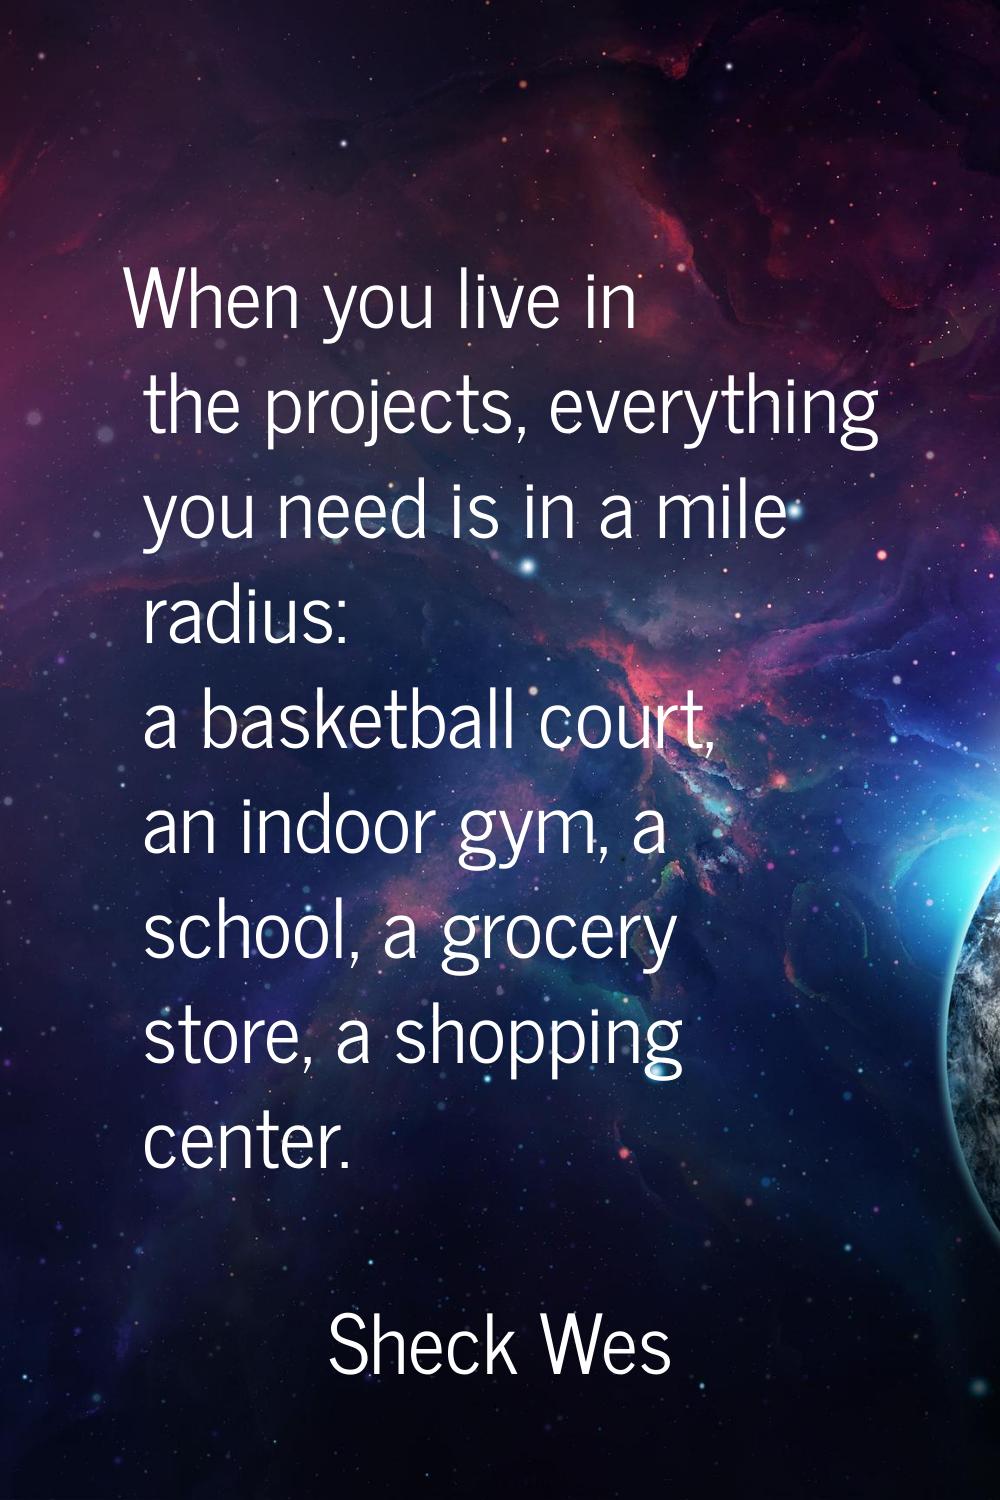 When you live in the projects, everything you need is in a mile radius: a basketball court, an indo